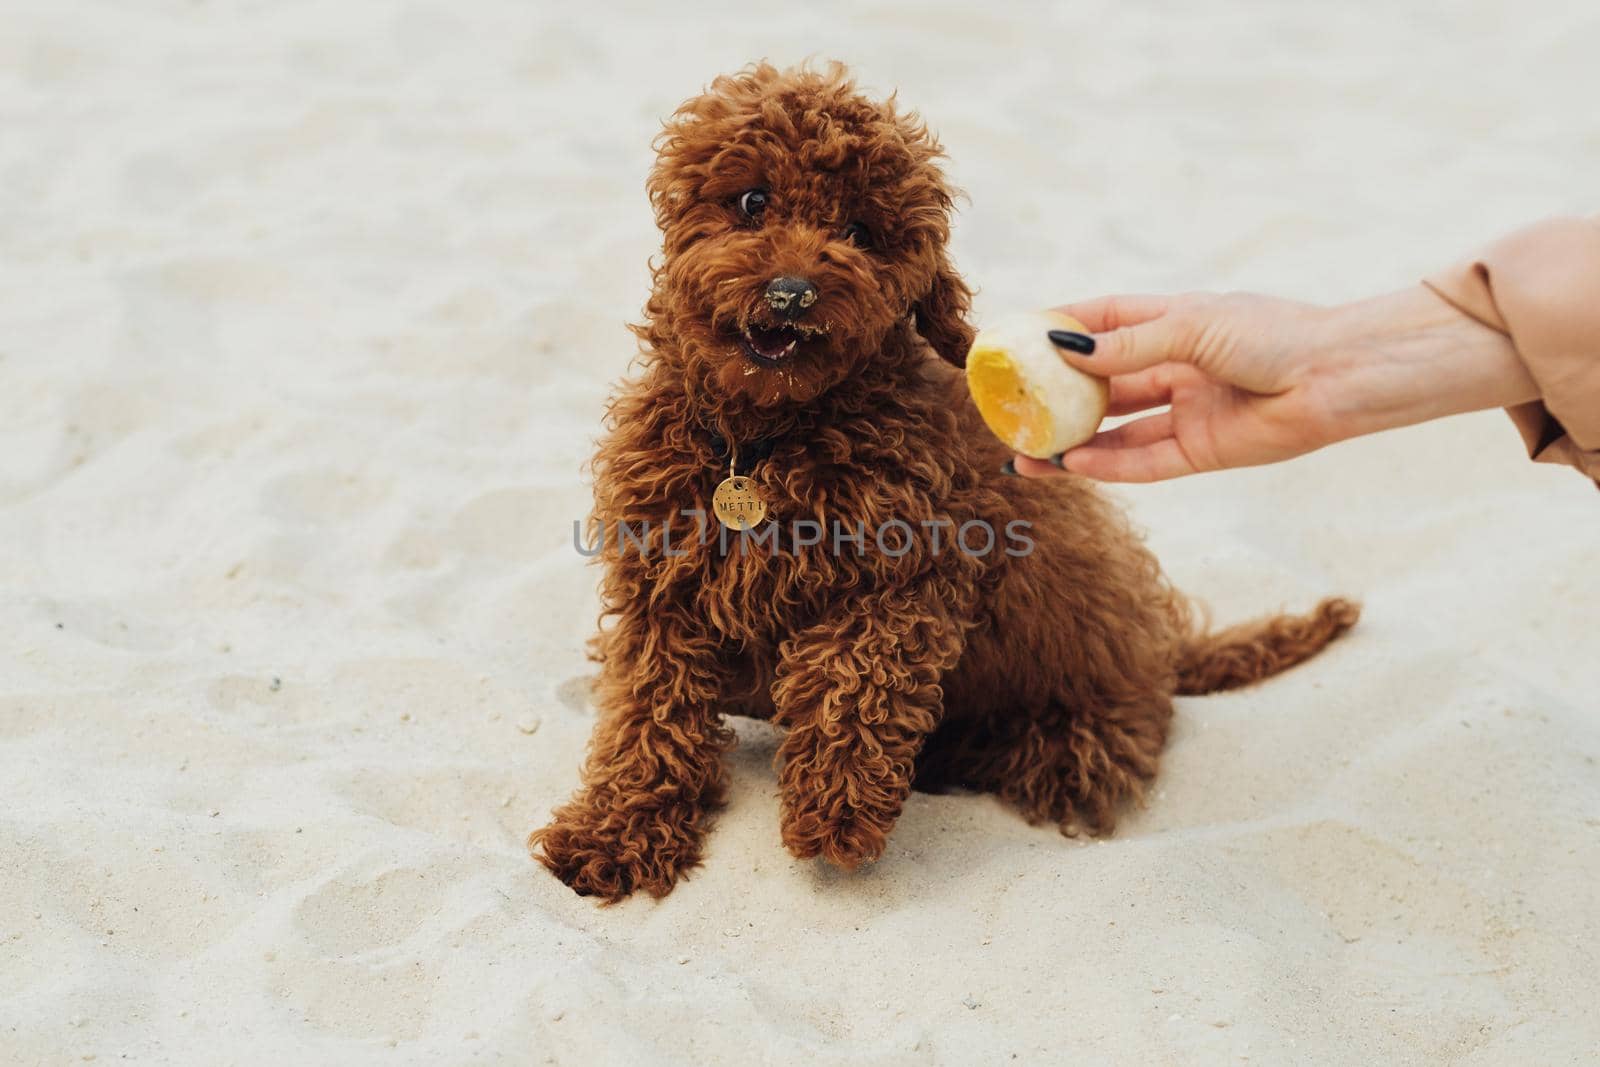 Playful Small Redhead Dog Playing Outdoors, Breed Toy Poodle Called Metti Having Fun Time with Owner